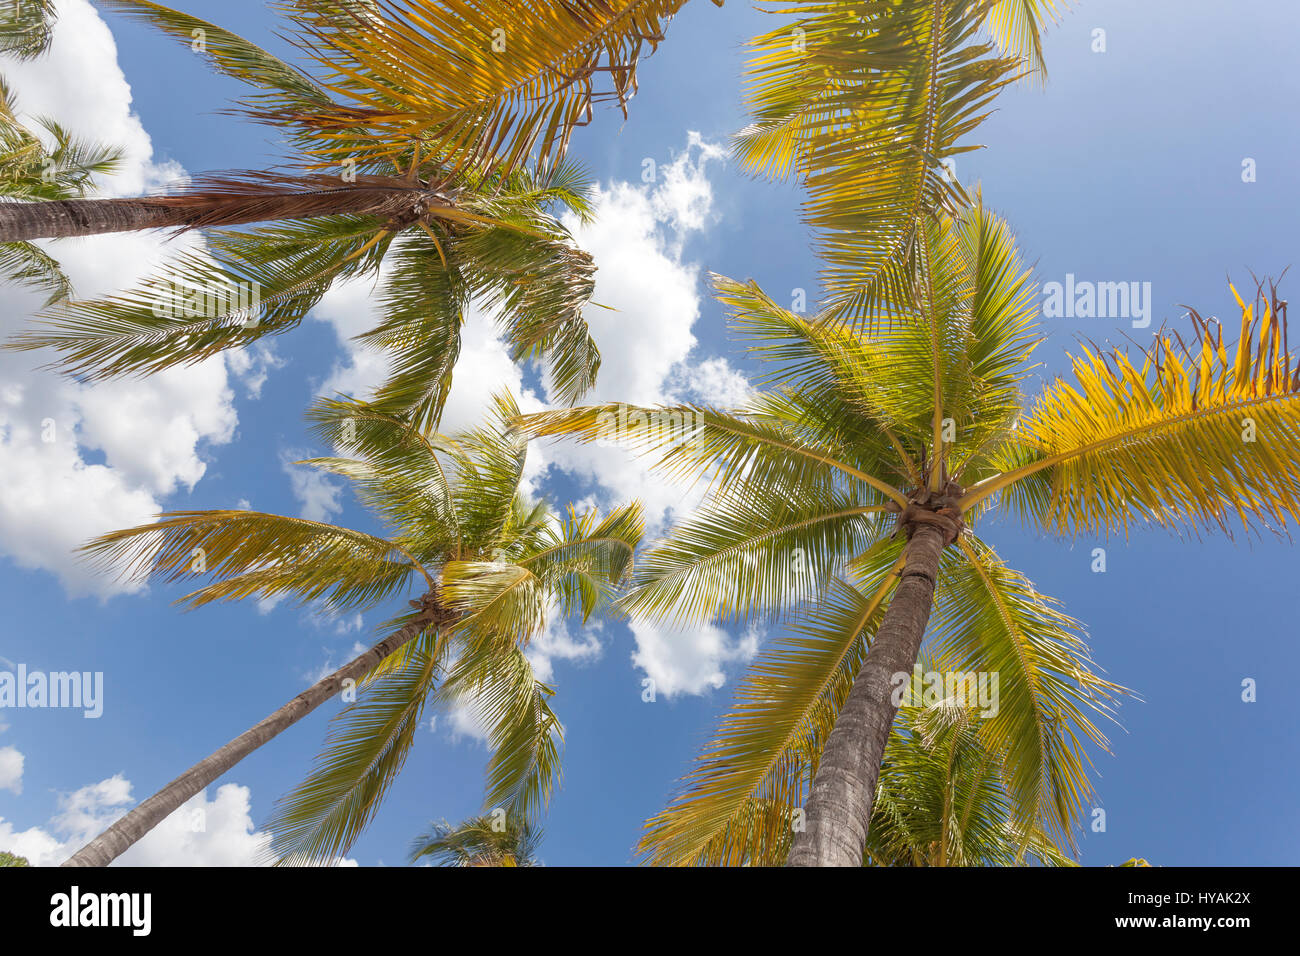 Coconut palm trees in a tropical paradise Stock Photo